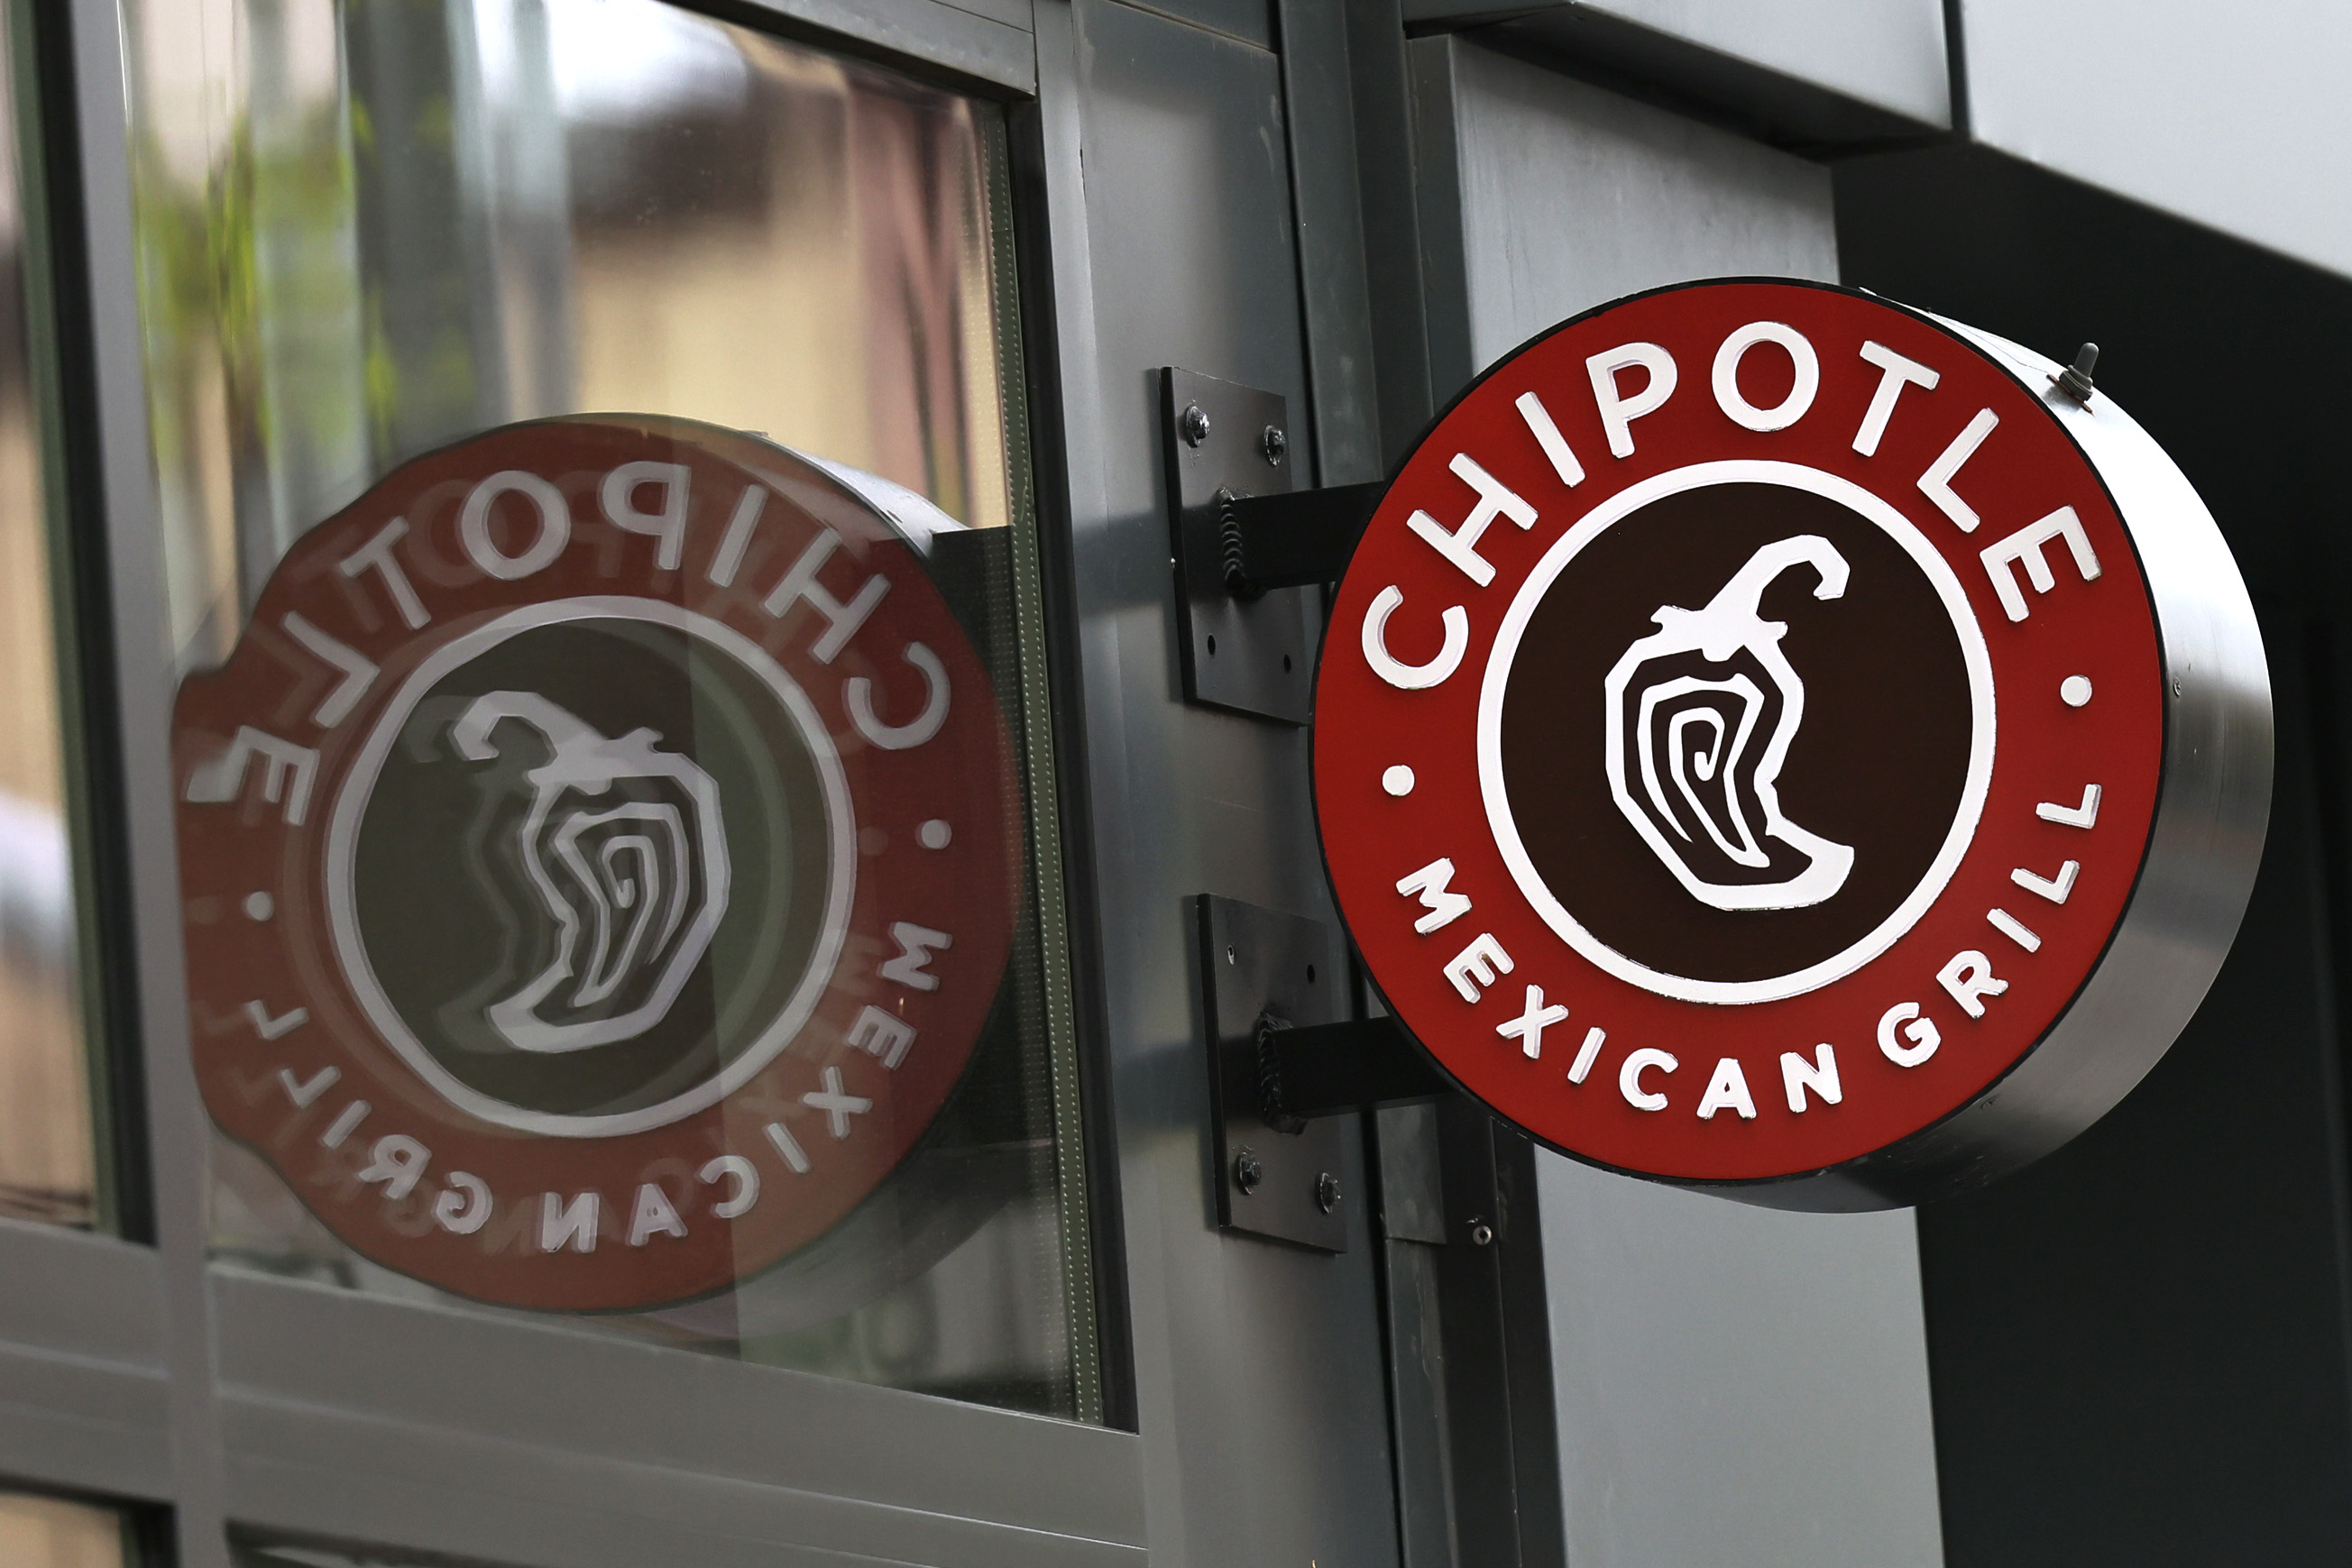 New York City Sues Chipotle For $150 Million Over Workweek Law Violations